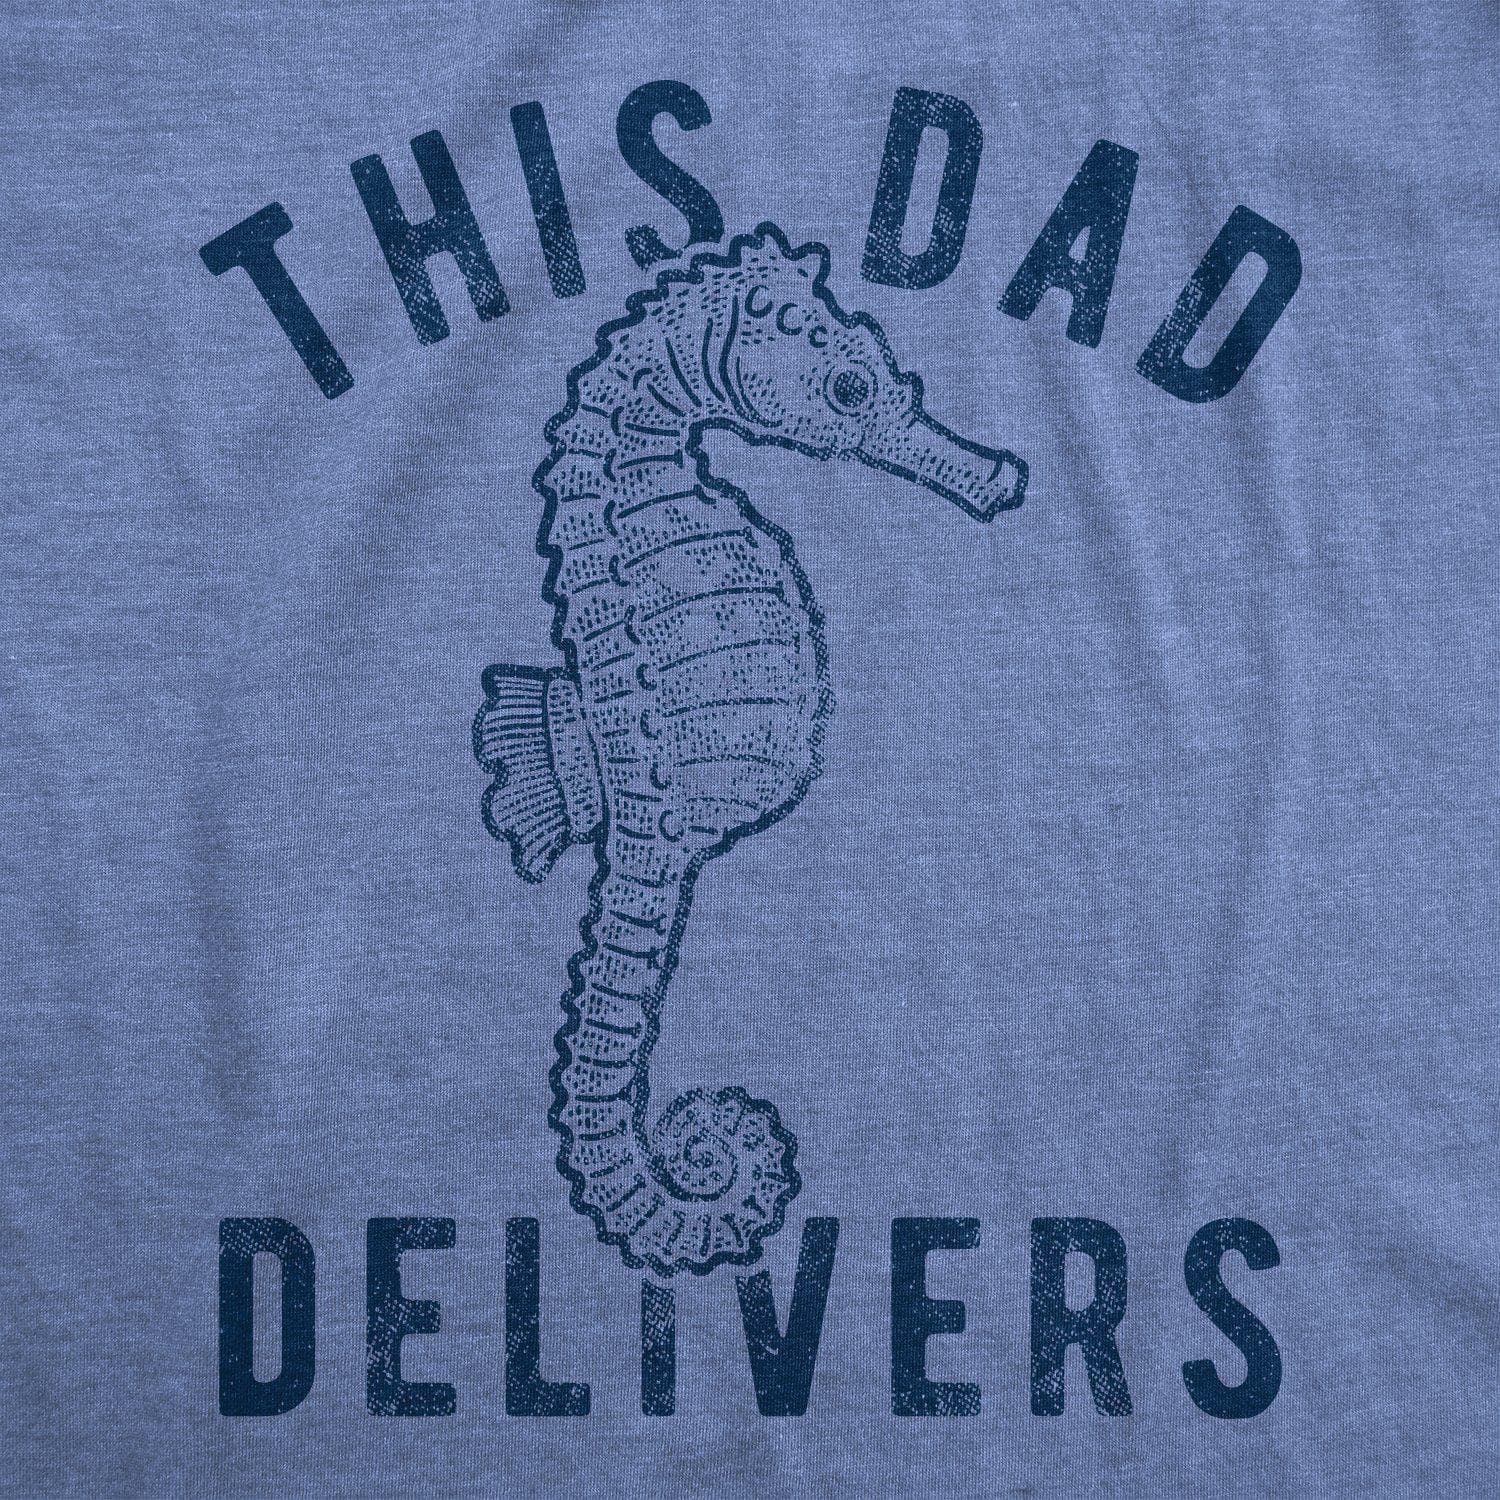 This Dad Delivers Men's Tshirt - Crazy Dog T-Shirts